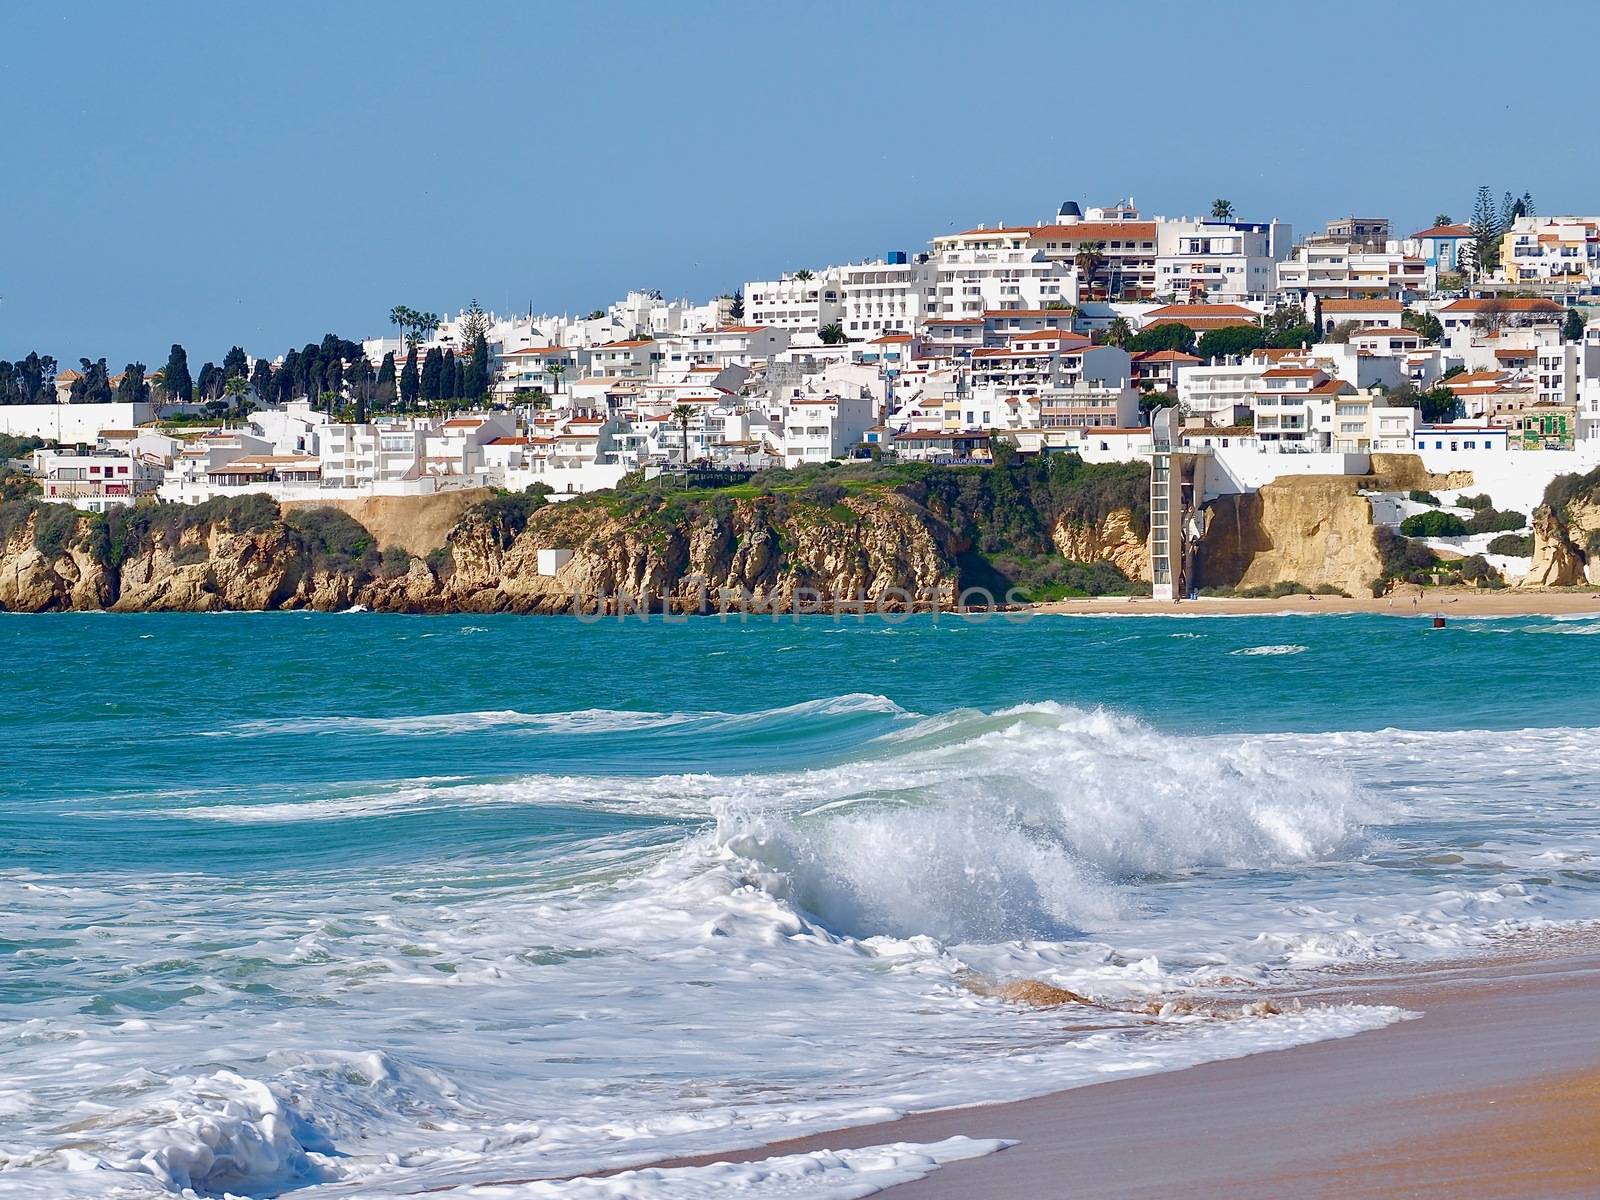 Cityscape and beach of Albufeira in Portugal by Stimmungsbilder